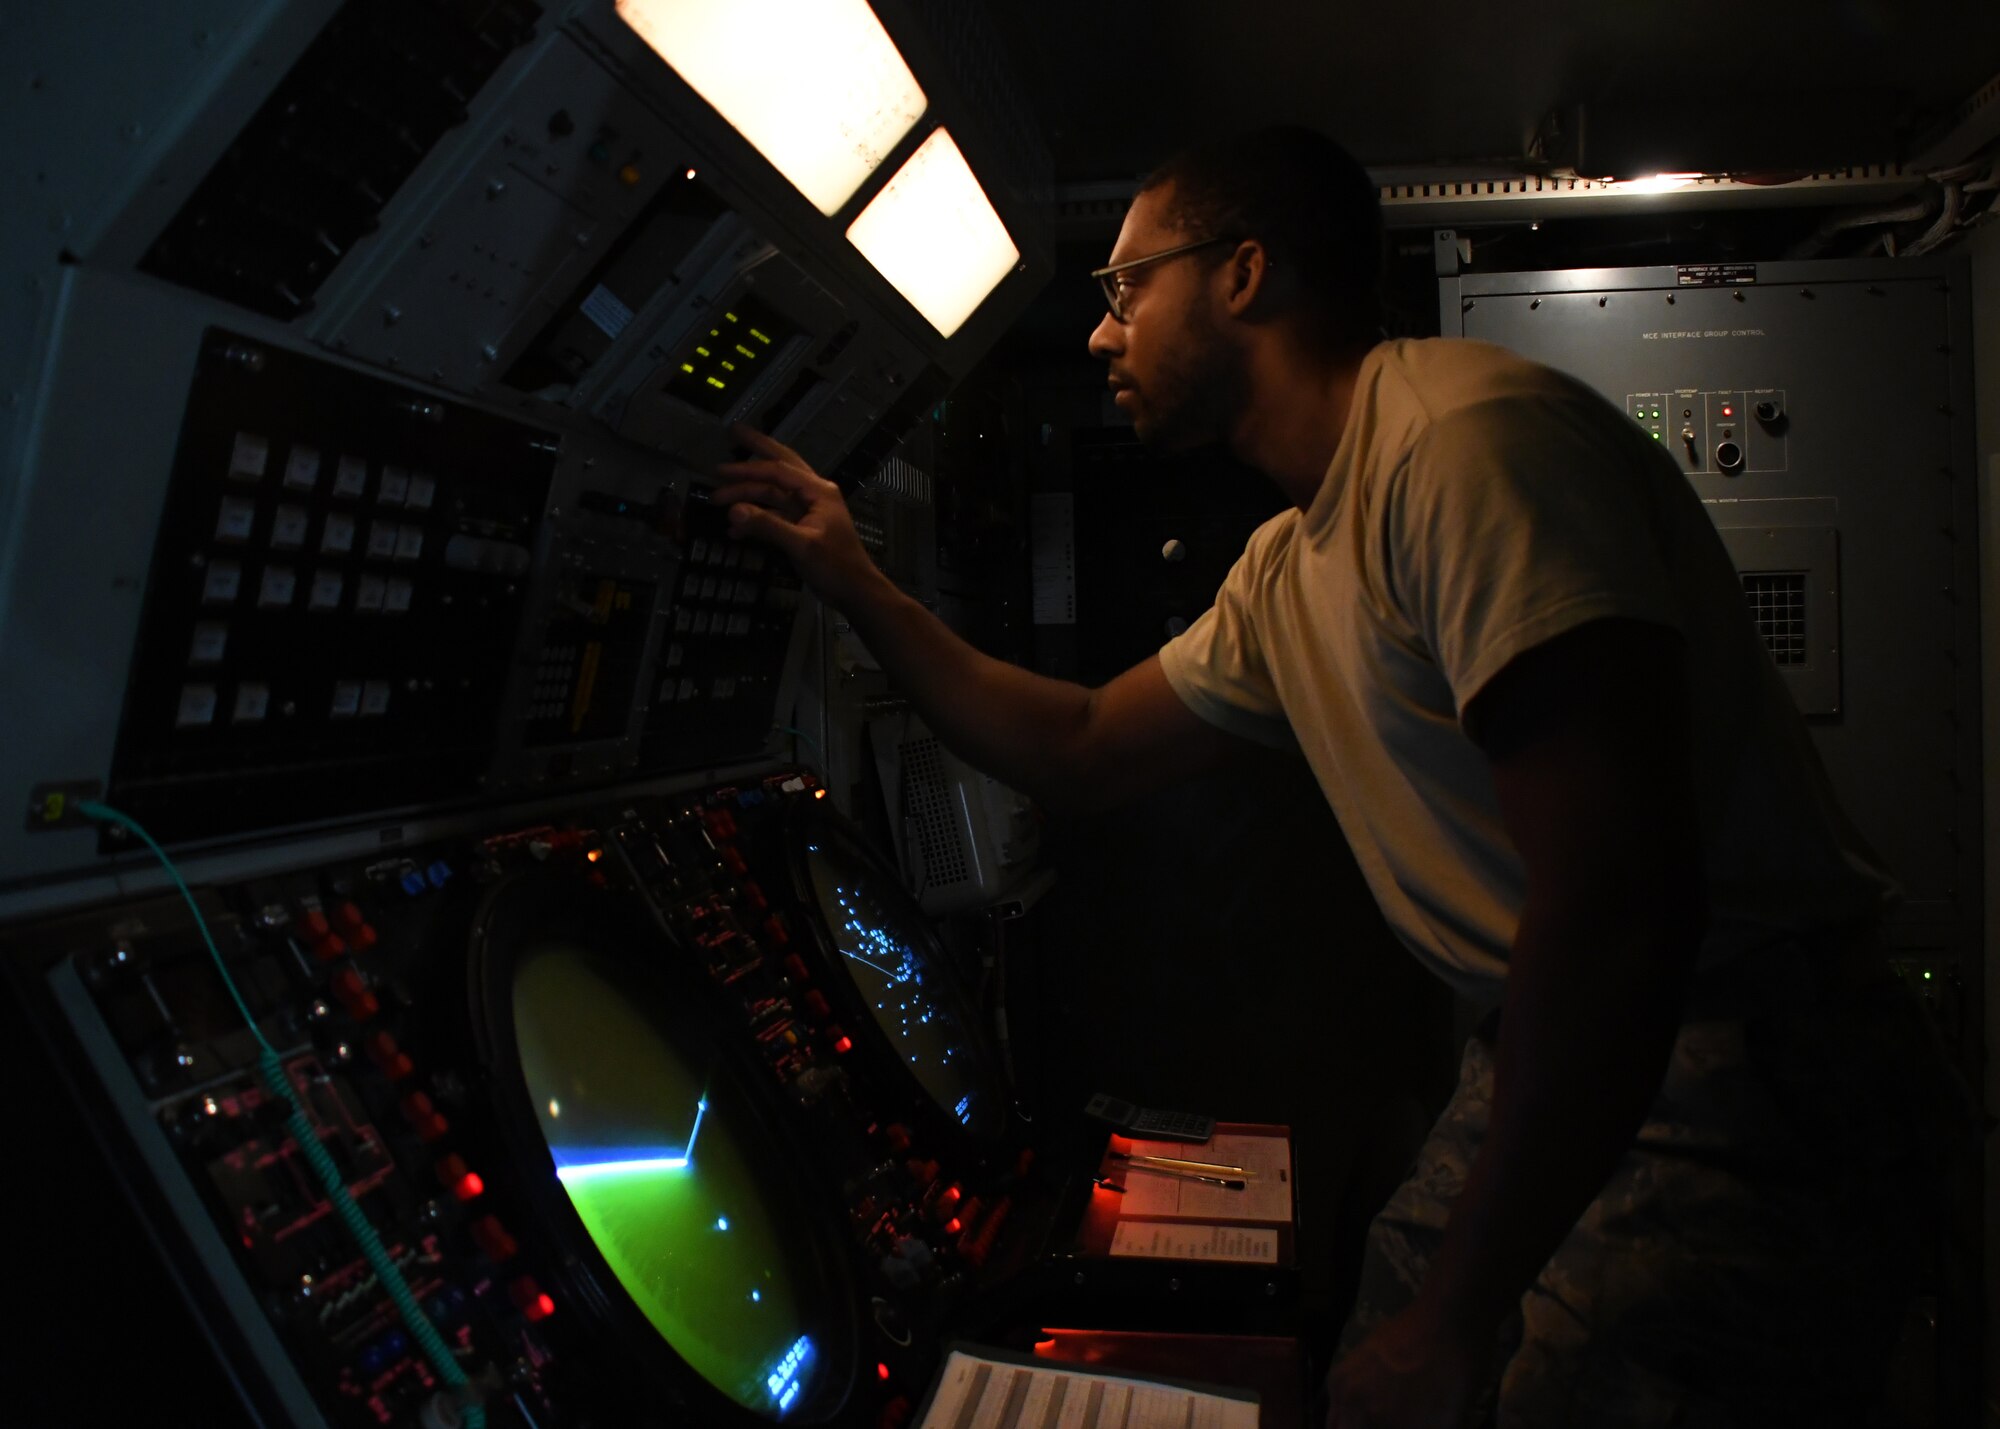 U.S. Air Force Senior Airman Darrin Brewer, a ground radar systems technician with the 727th Expeditionary Air Control Squadron Detachment 3, ensures that a radar system is functioning correctly at Al Udeid Air Base, Qatar, March 31, 2017. The 727th EACS Det. 3 works to maintain two ground radar systems at Al Udeid, and ensures that at least one of them is running at all times. (U.S. Air Force photo by Senior Airman Miles Wilson)